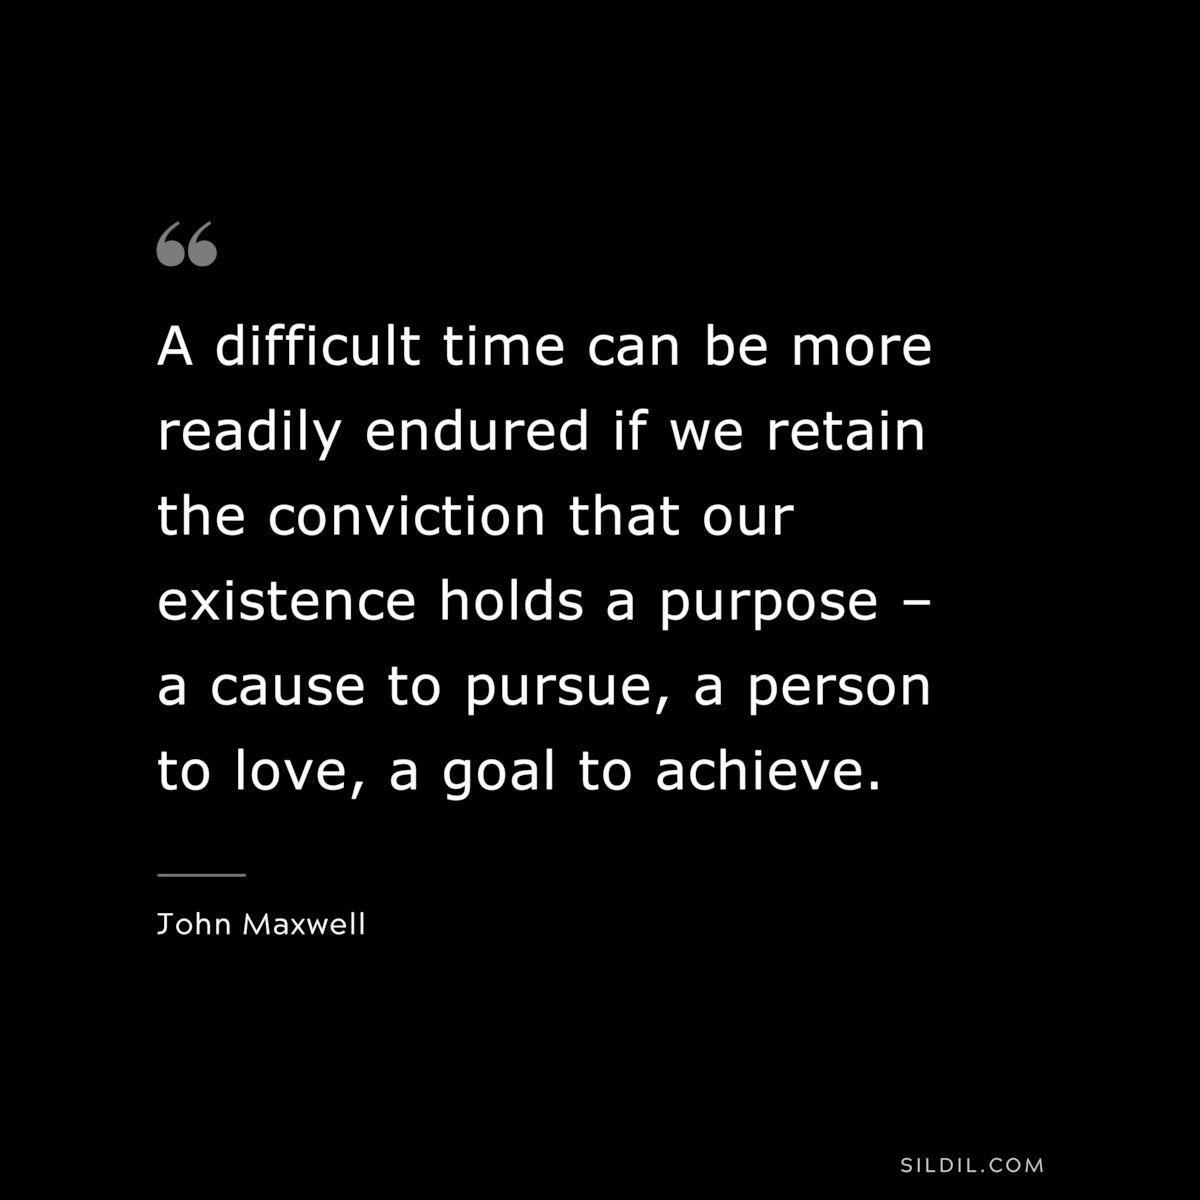 A difficult time can be more readily endured if we retain the conviction that our existence holds a purpose – a cause to pursue, a person to love, a goal to achieve. ― John Maxwell